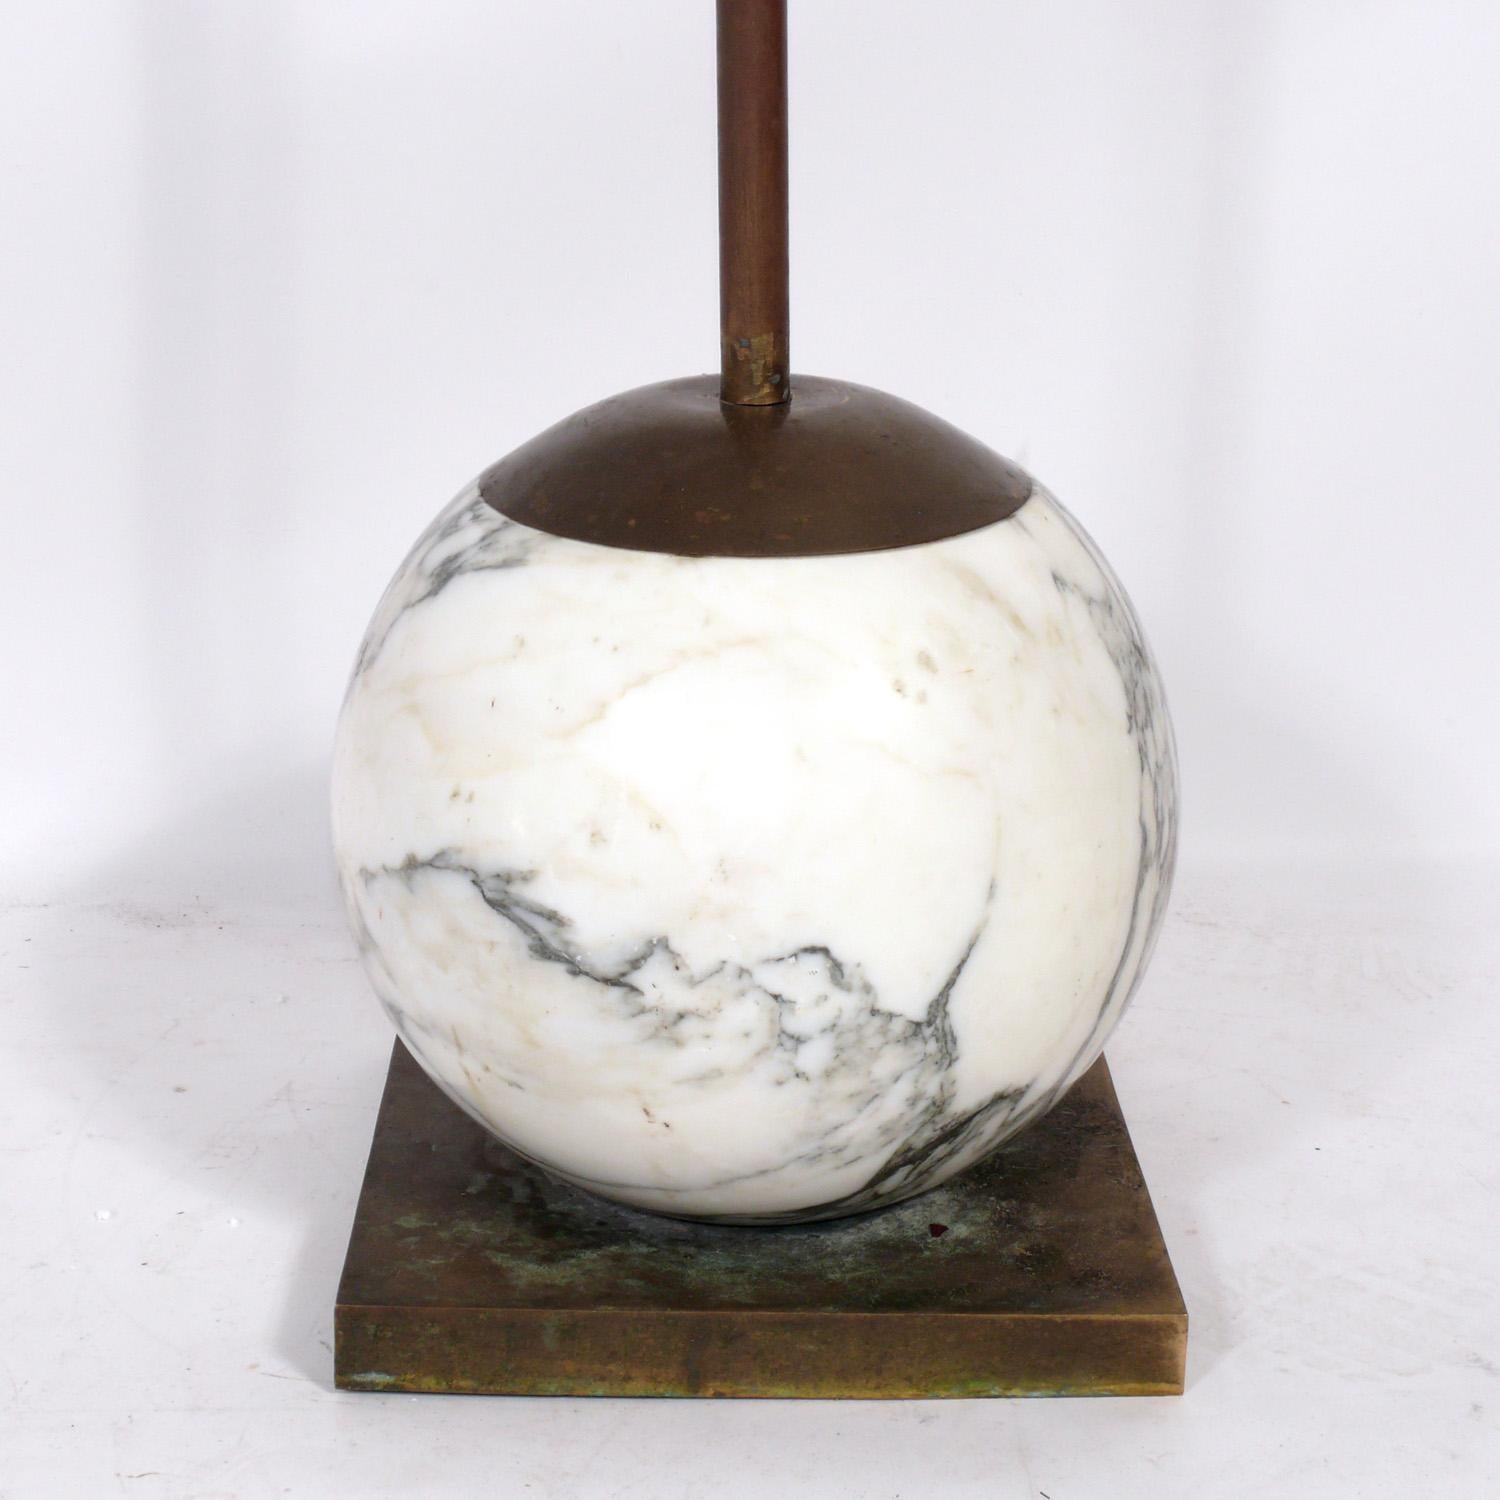 Sculptural Italian marble ball floor lamp, Italy, circa 1980s. Very heavy and well made. Rewired and ready to use. The price noted includes the lamp shade.